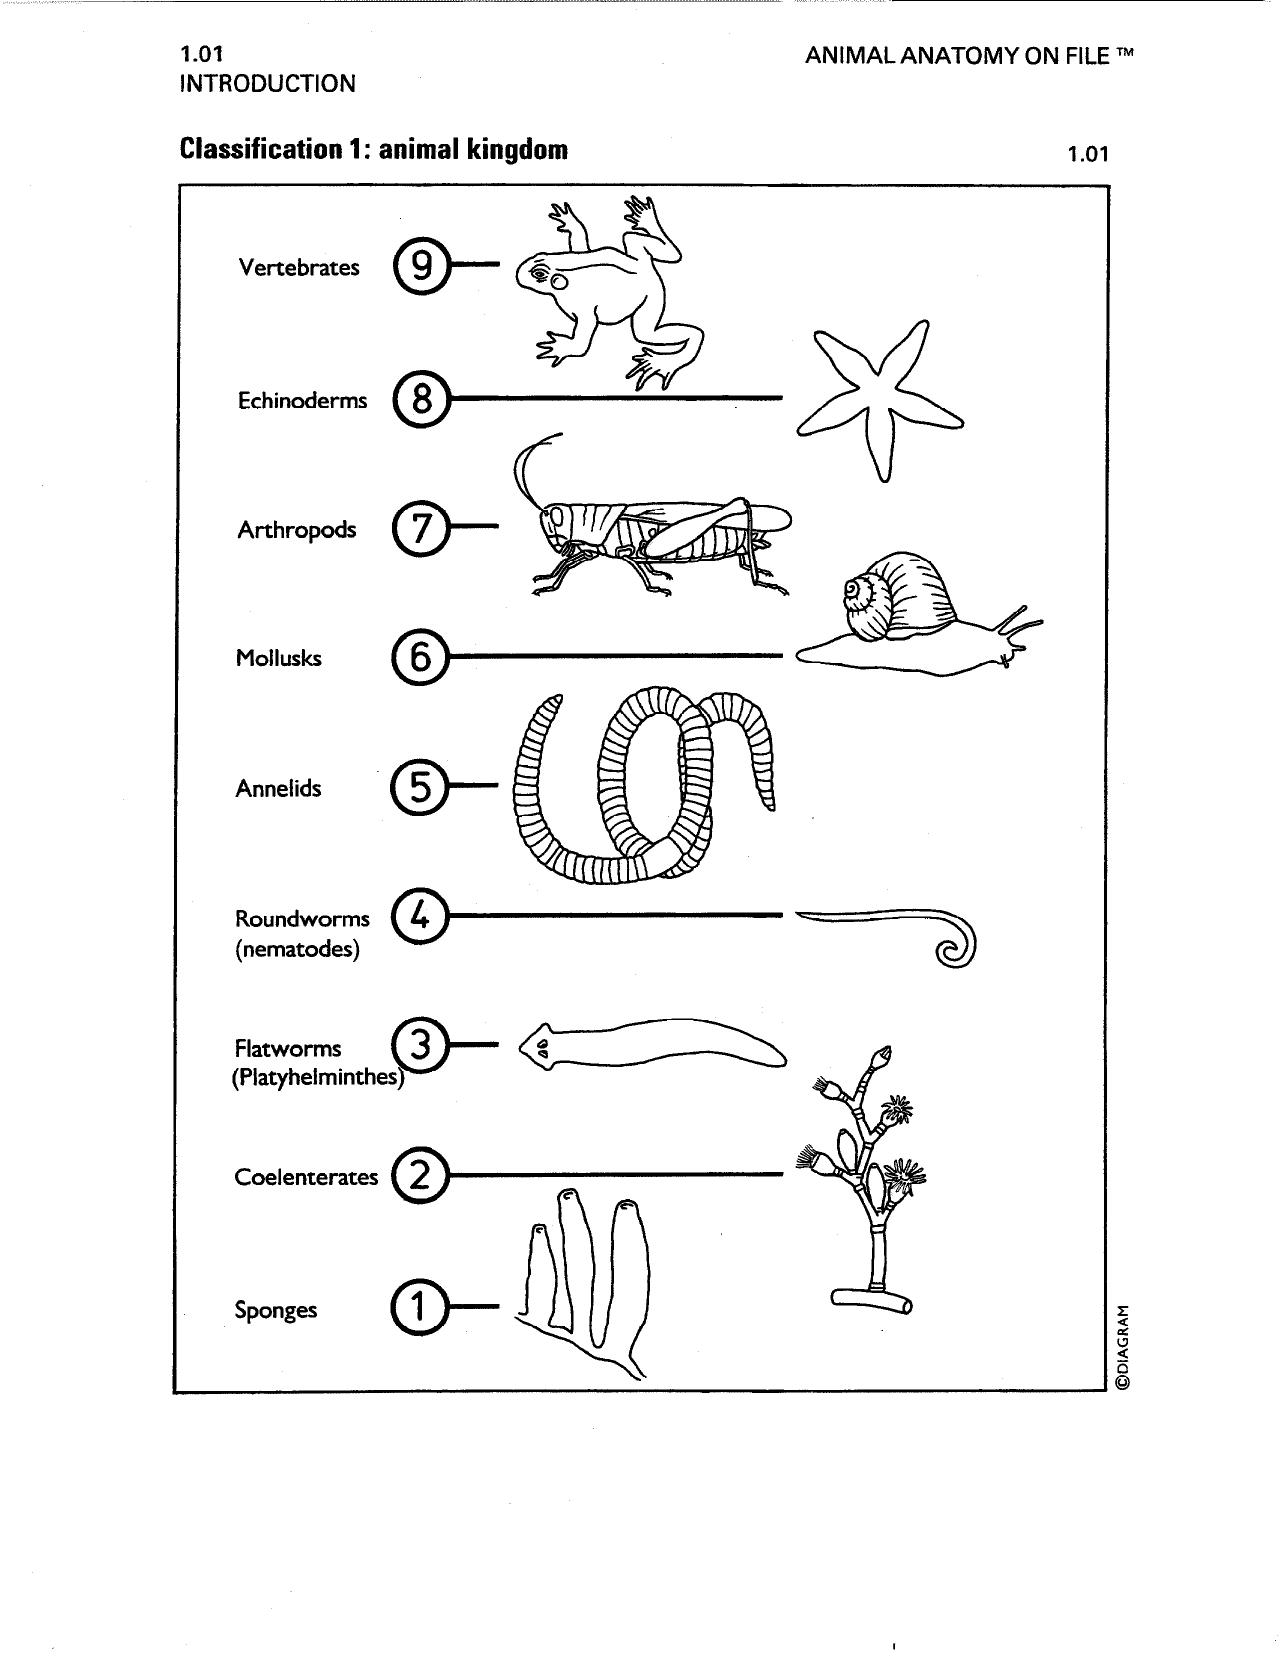 Animal Anatomy on File (Facts on File Science Library) by Diagram Group